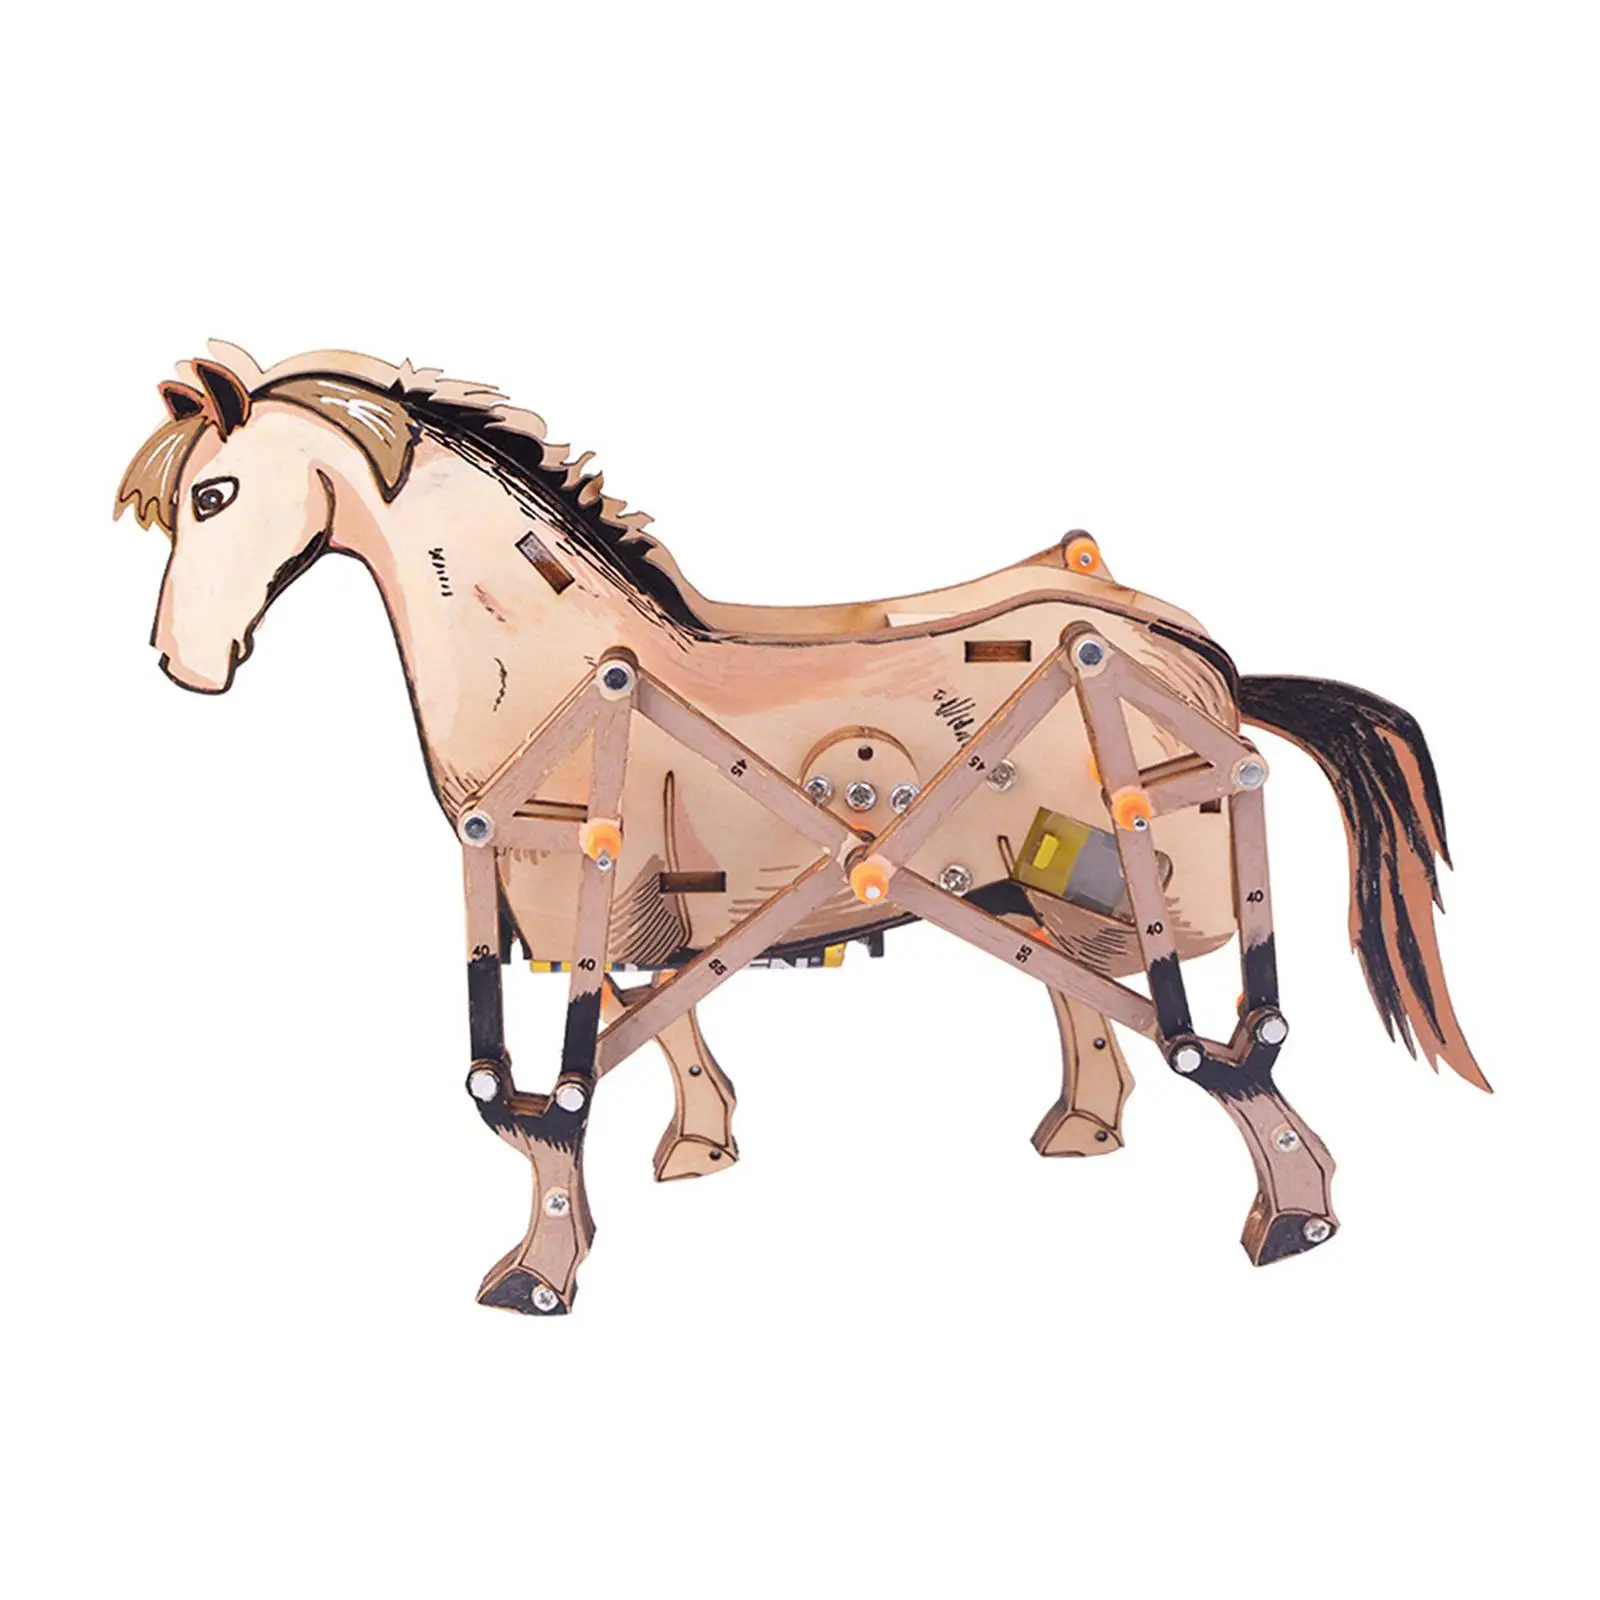 3D Mechanical Horse Educational toy Woodcraft horse Model for Gift Science Learning Interaction